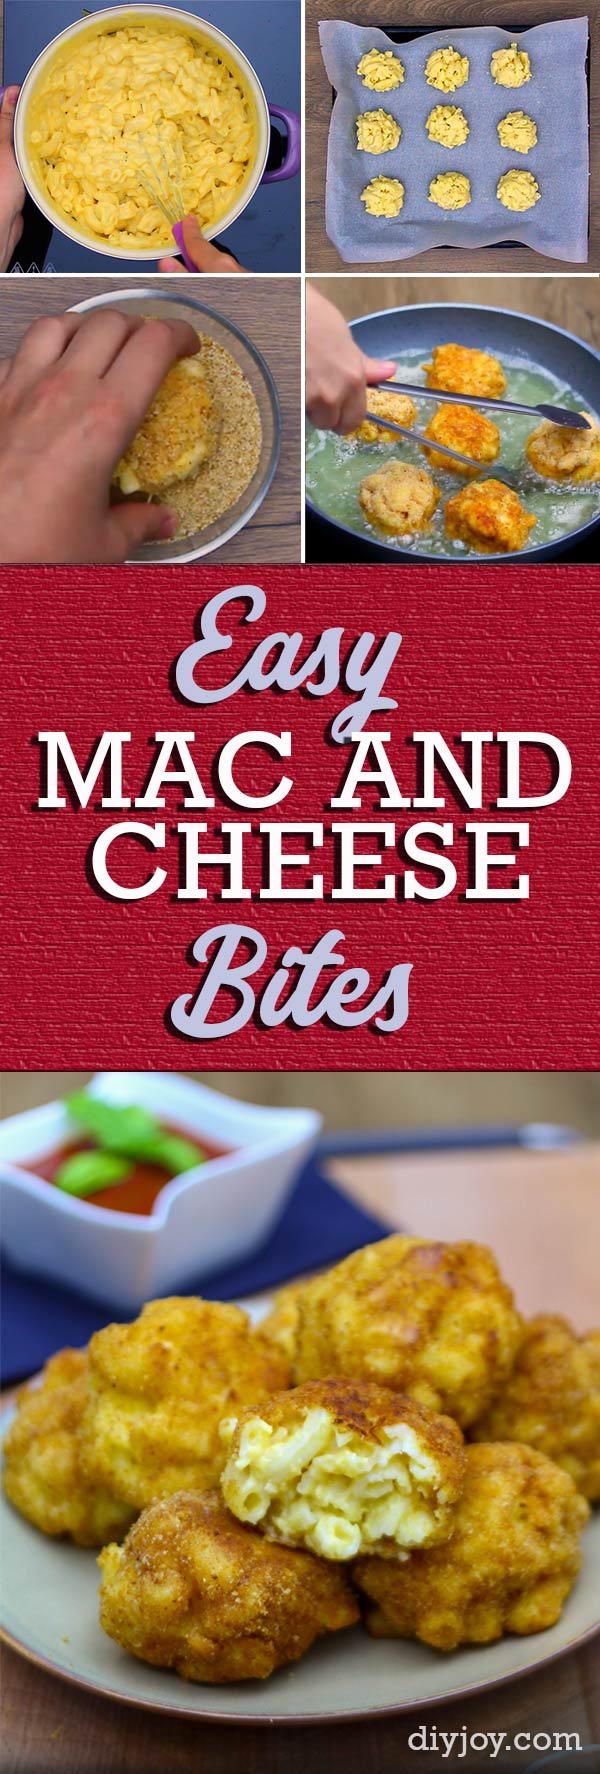 Easy Appetizer Recipes - Fried Macaroni and Cheese Bites Are the Perfect Party Food for A Crowd - Recipe Idea for Simple Snacks to Make At Home 